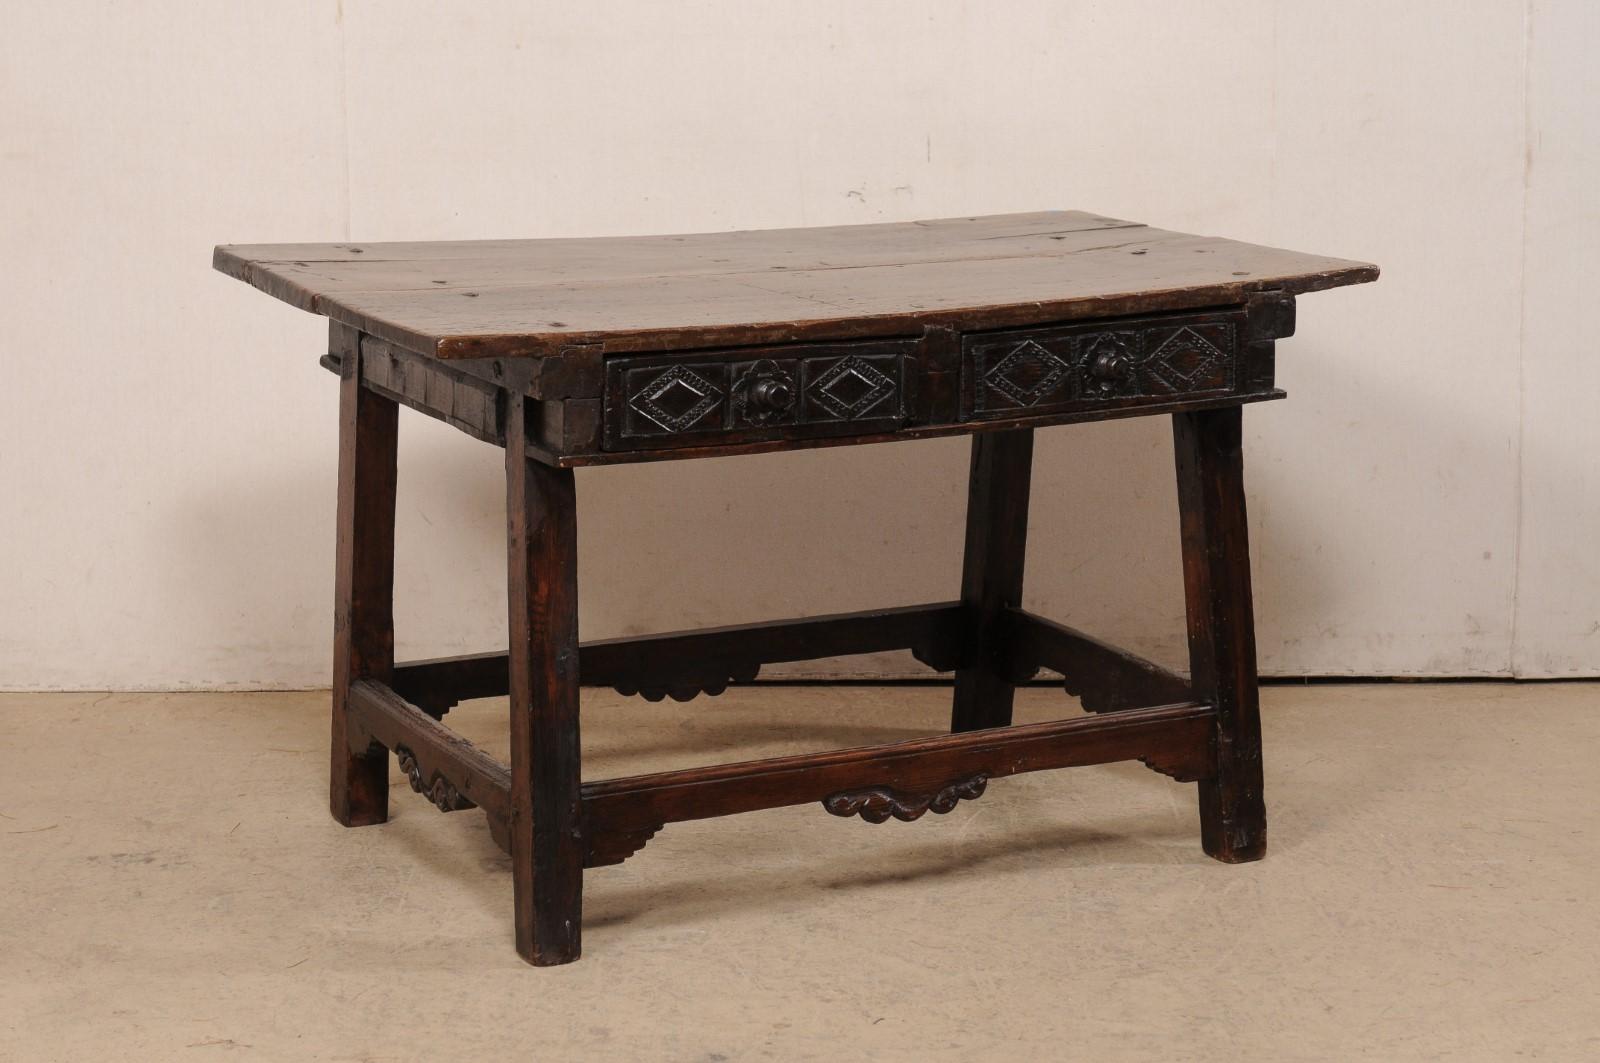 A Spanish carved-walnut occasional table with drawers from the 18th century. This antique table from Spain, created from rich walnut wood, has a rectangular-shaped top, which overhangs the apron below which houses a pair of half drawers at one long